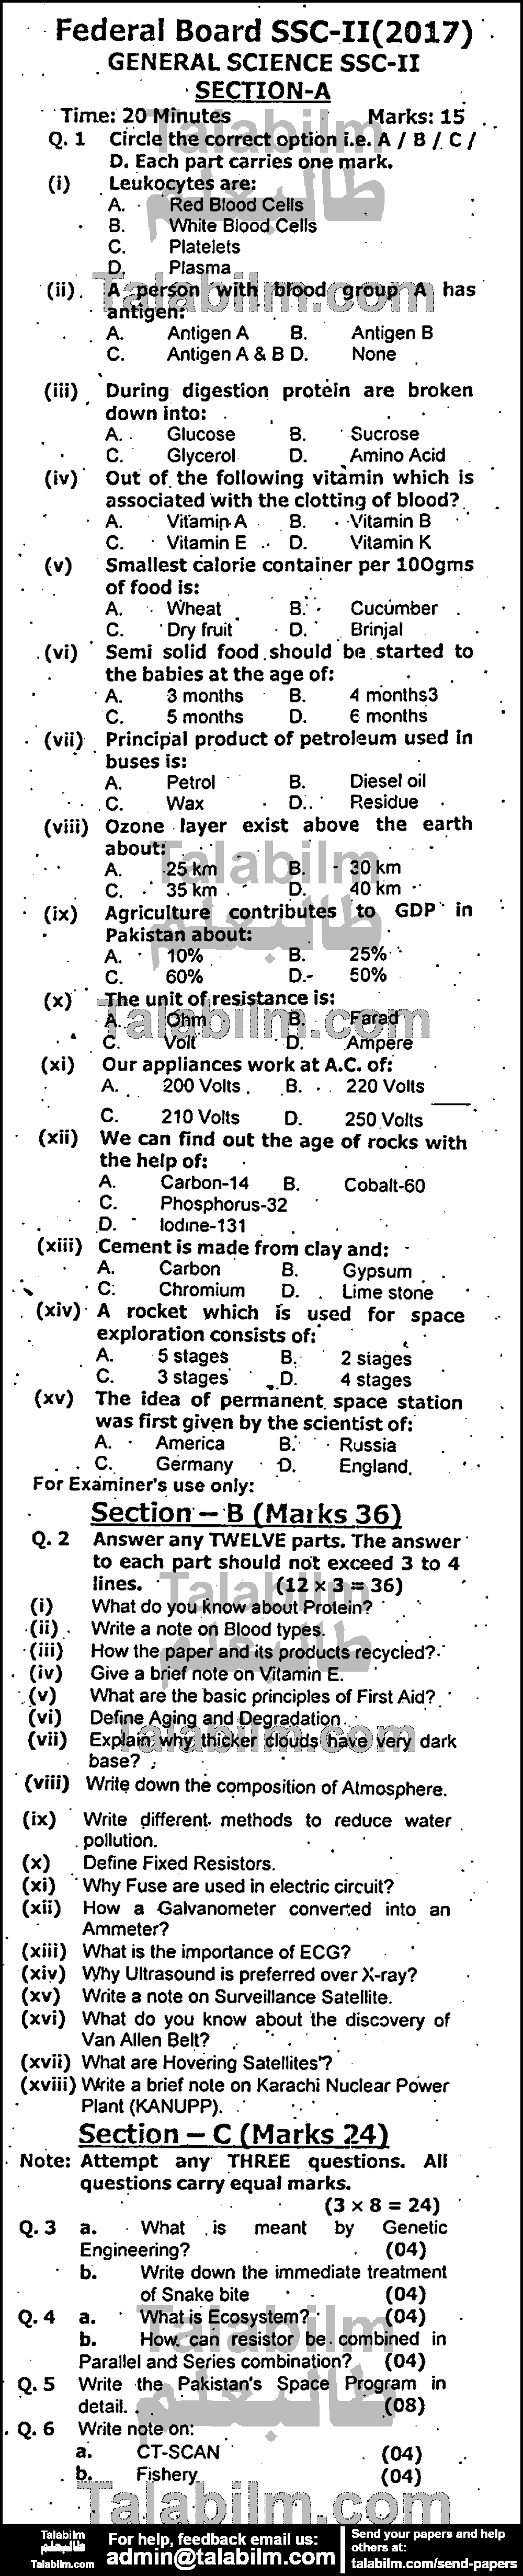 General Science 0 past paper for 2017 Group-I